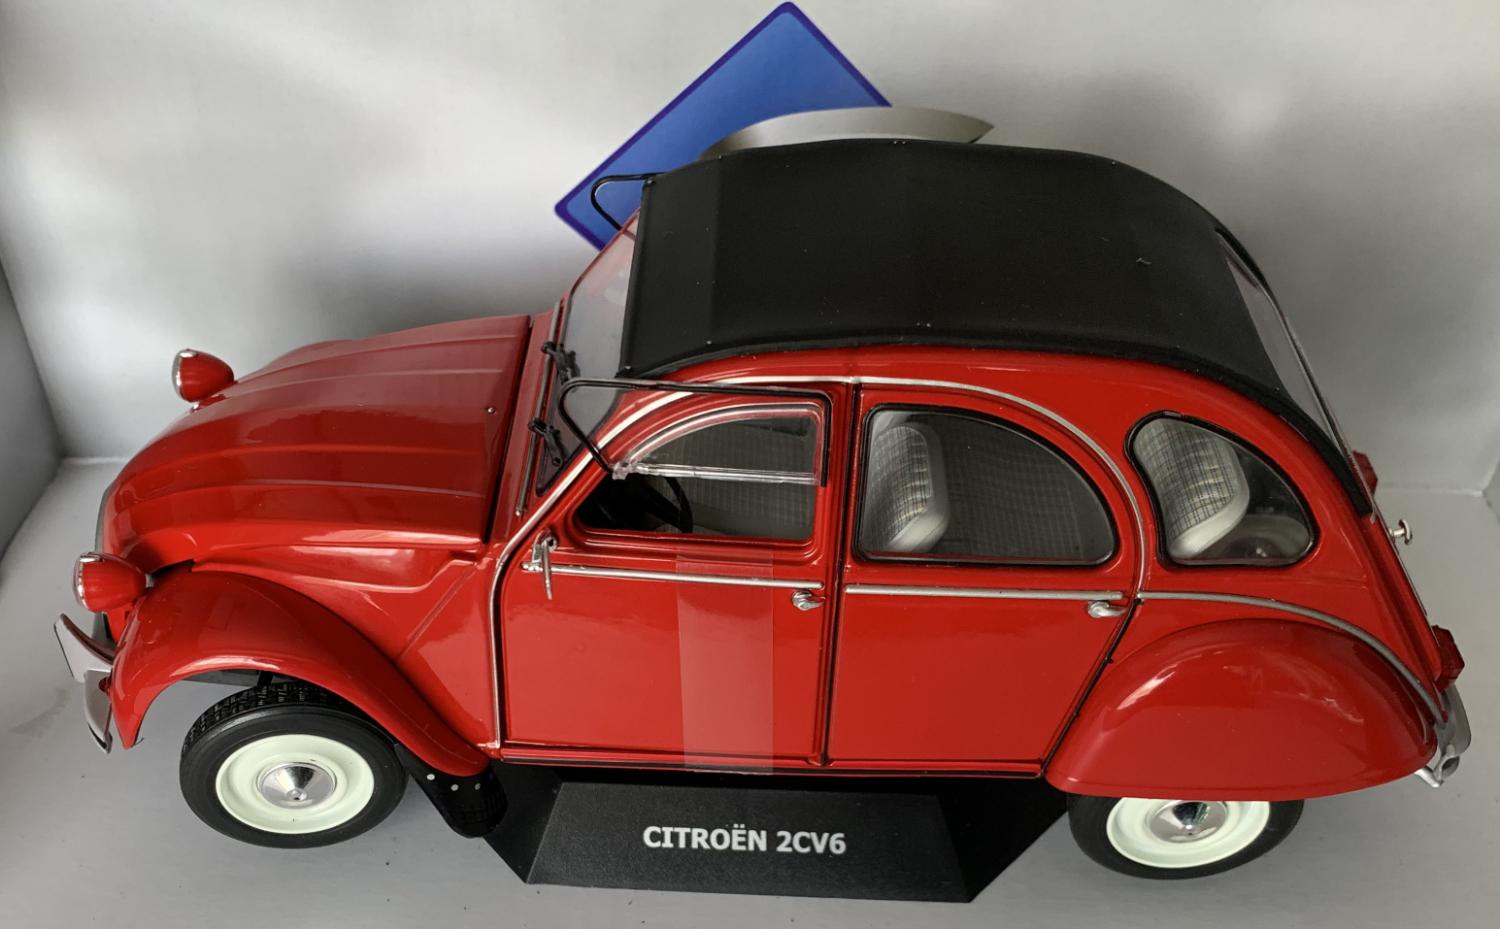 Citroen 2CV6 1982 in red 1:18 scale model from Solido